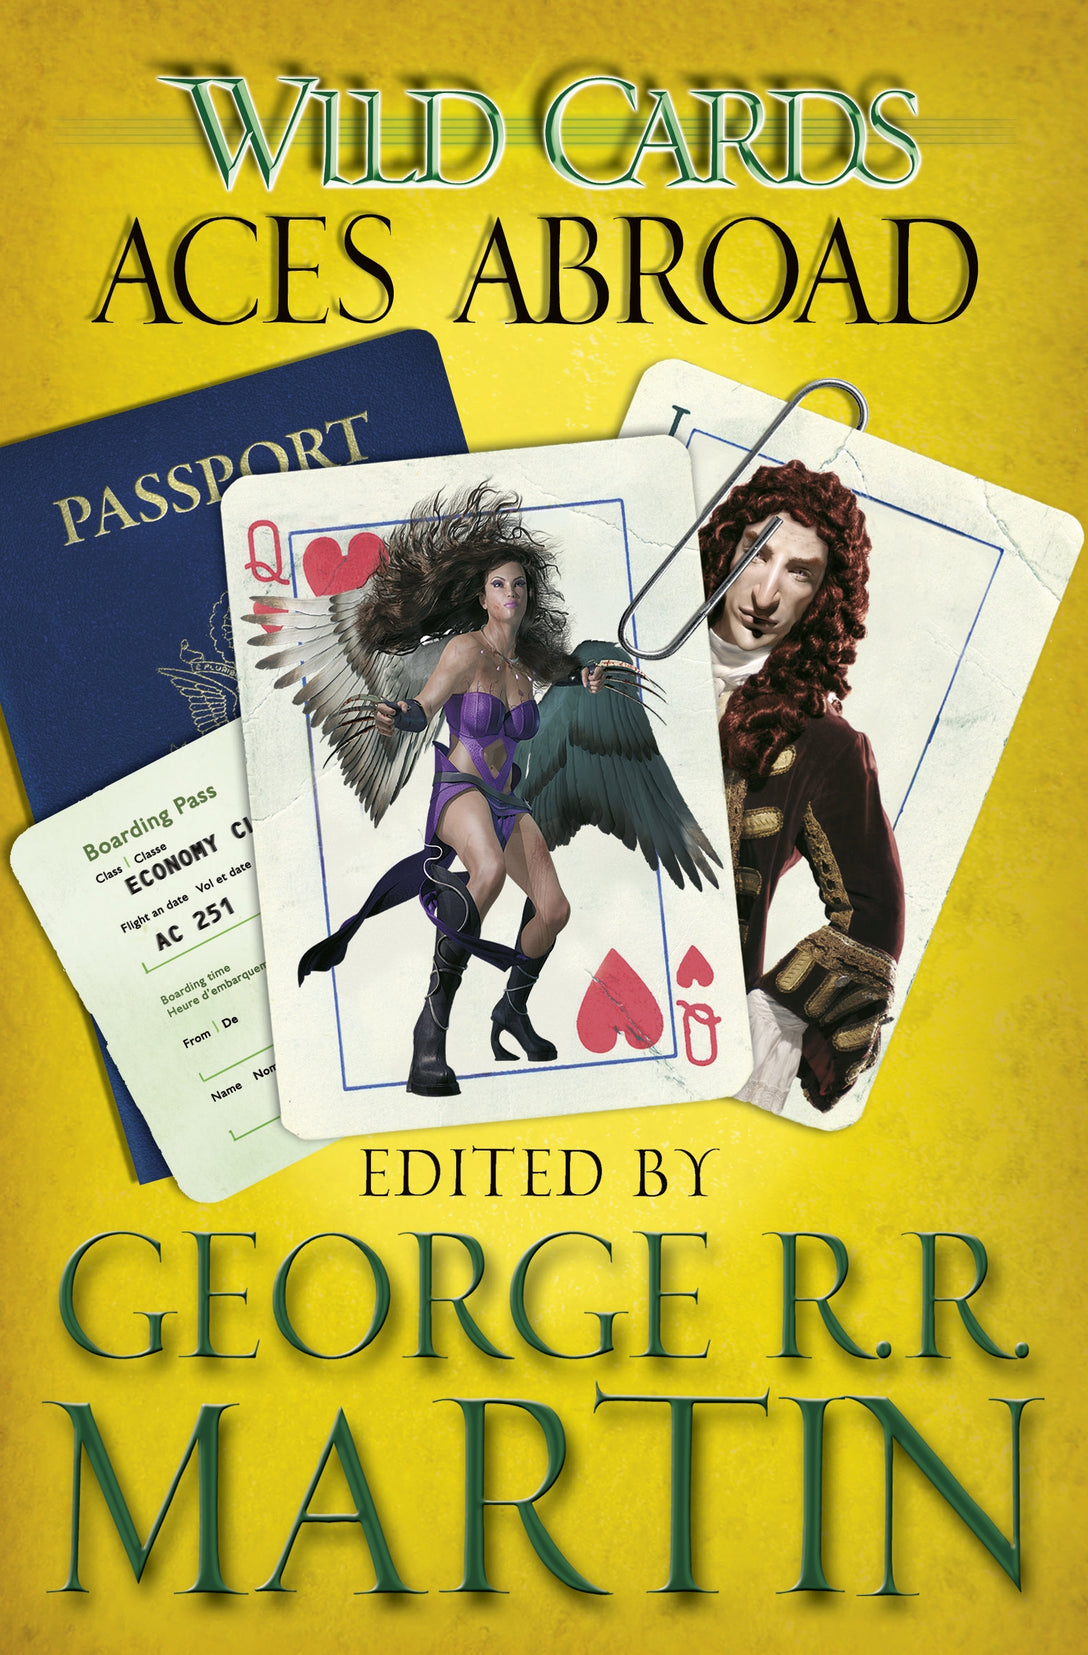 Wild Cards: Aces Abroad by George R.R. Martin